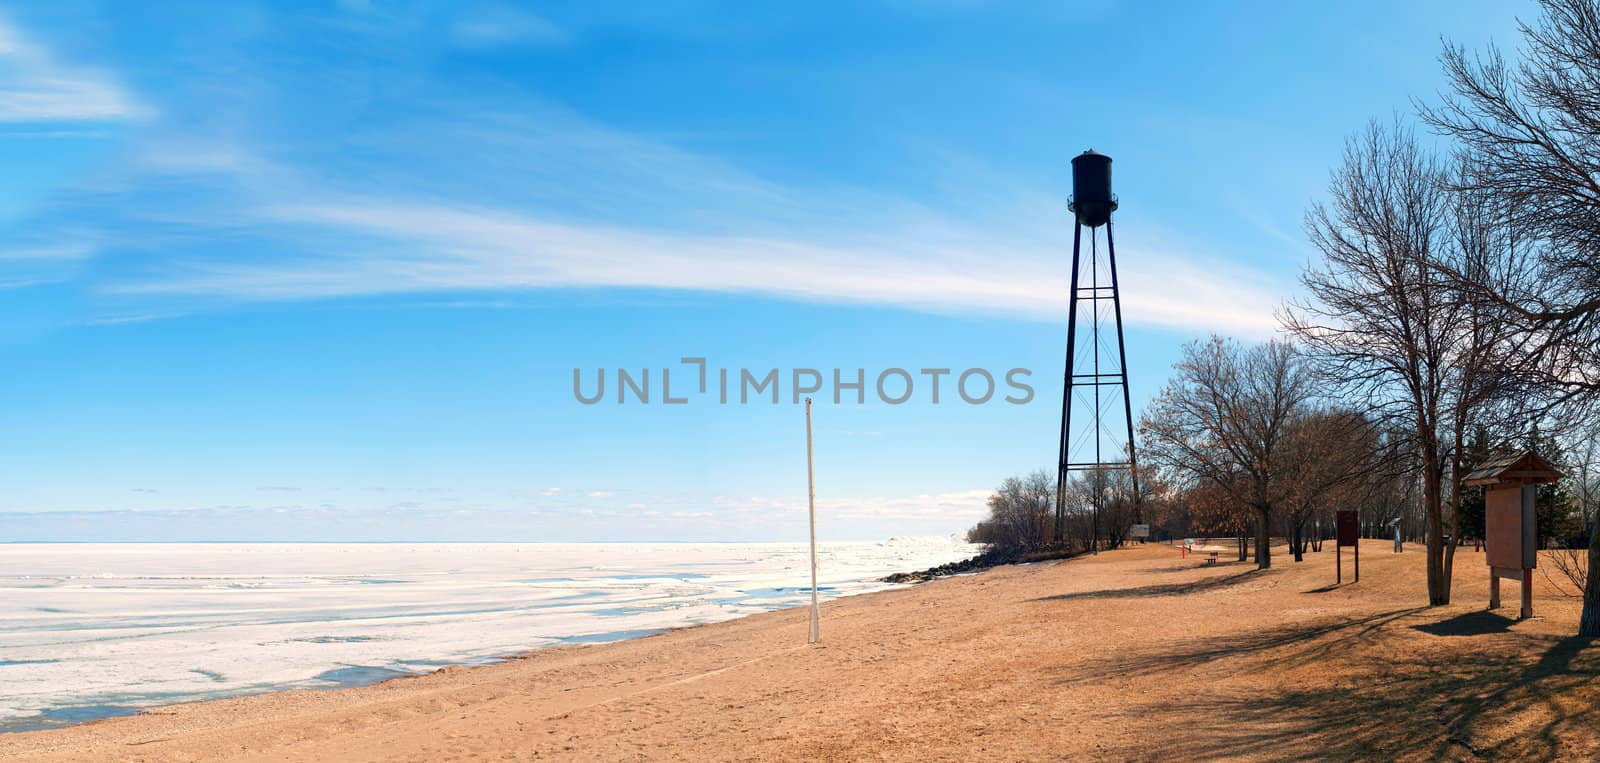 A rural beach in the spring with the lake still frozen, shot with a blue sky